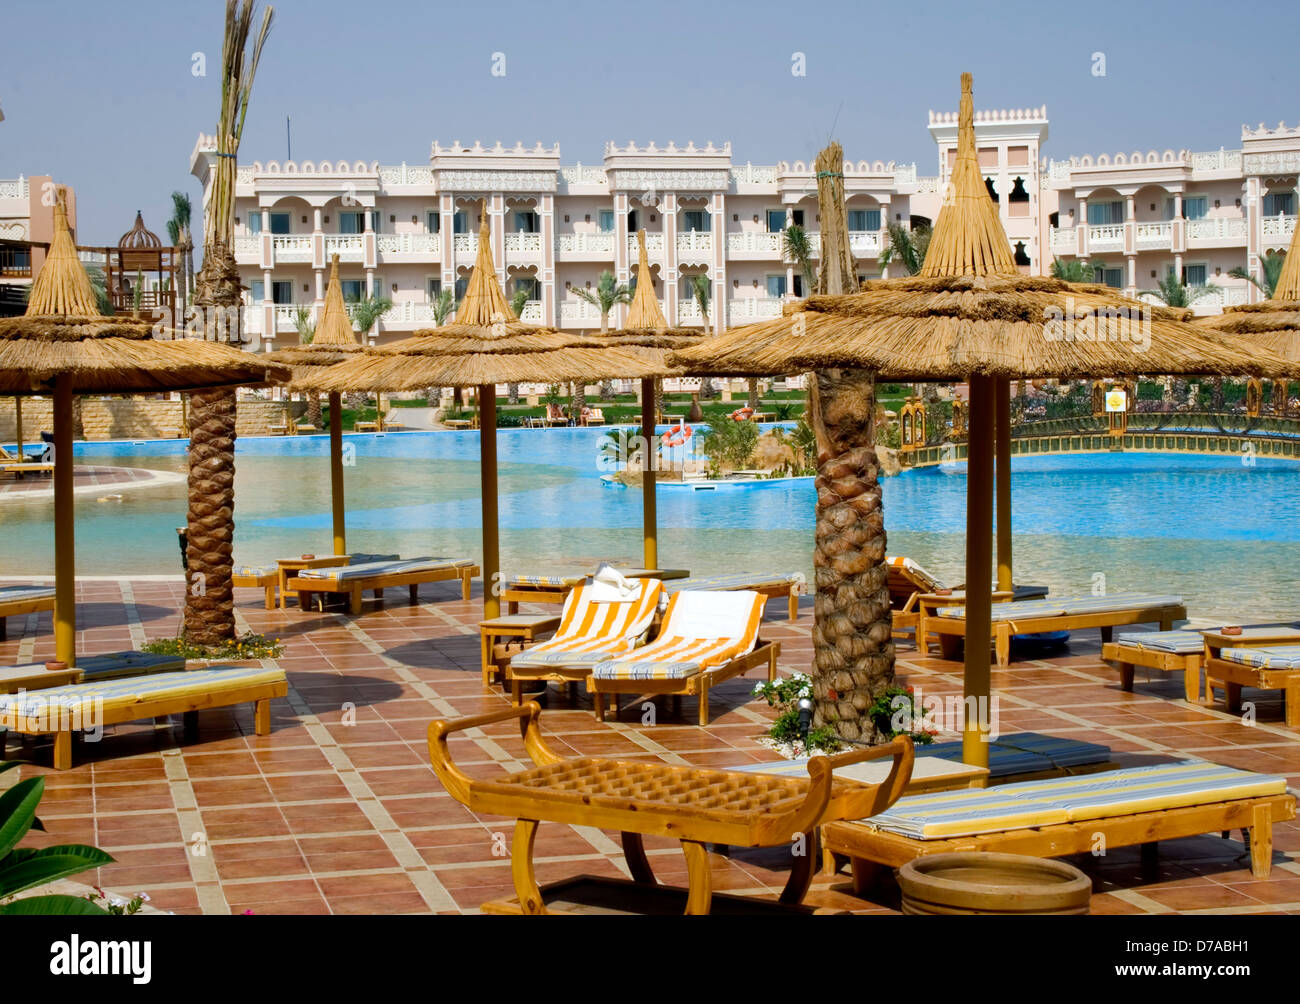 luxury egyptian resort hotel with pool and palm trees Stock Photo